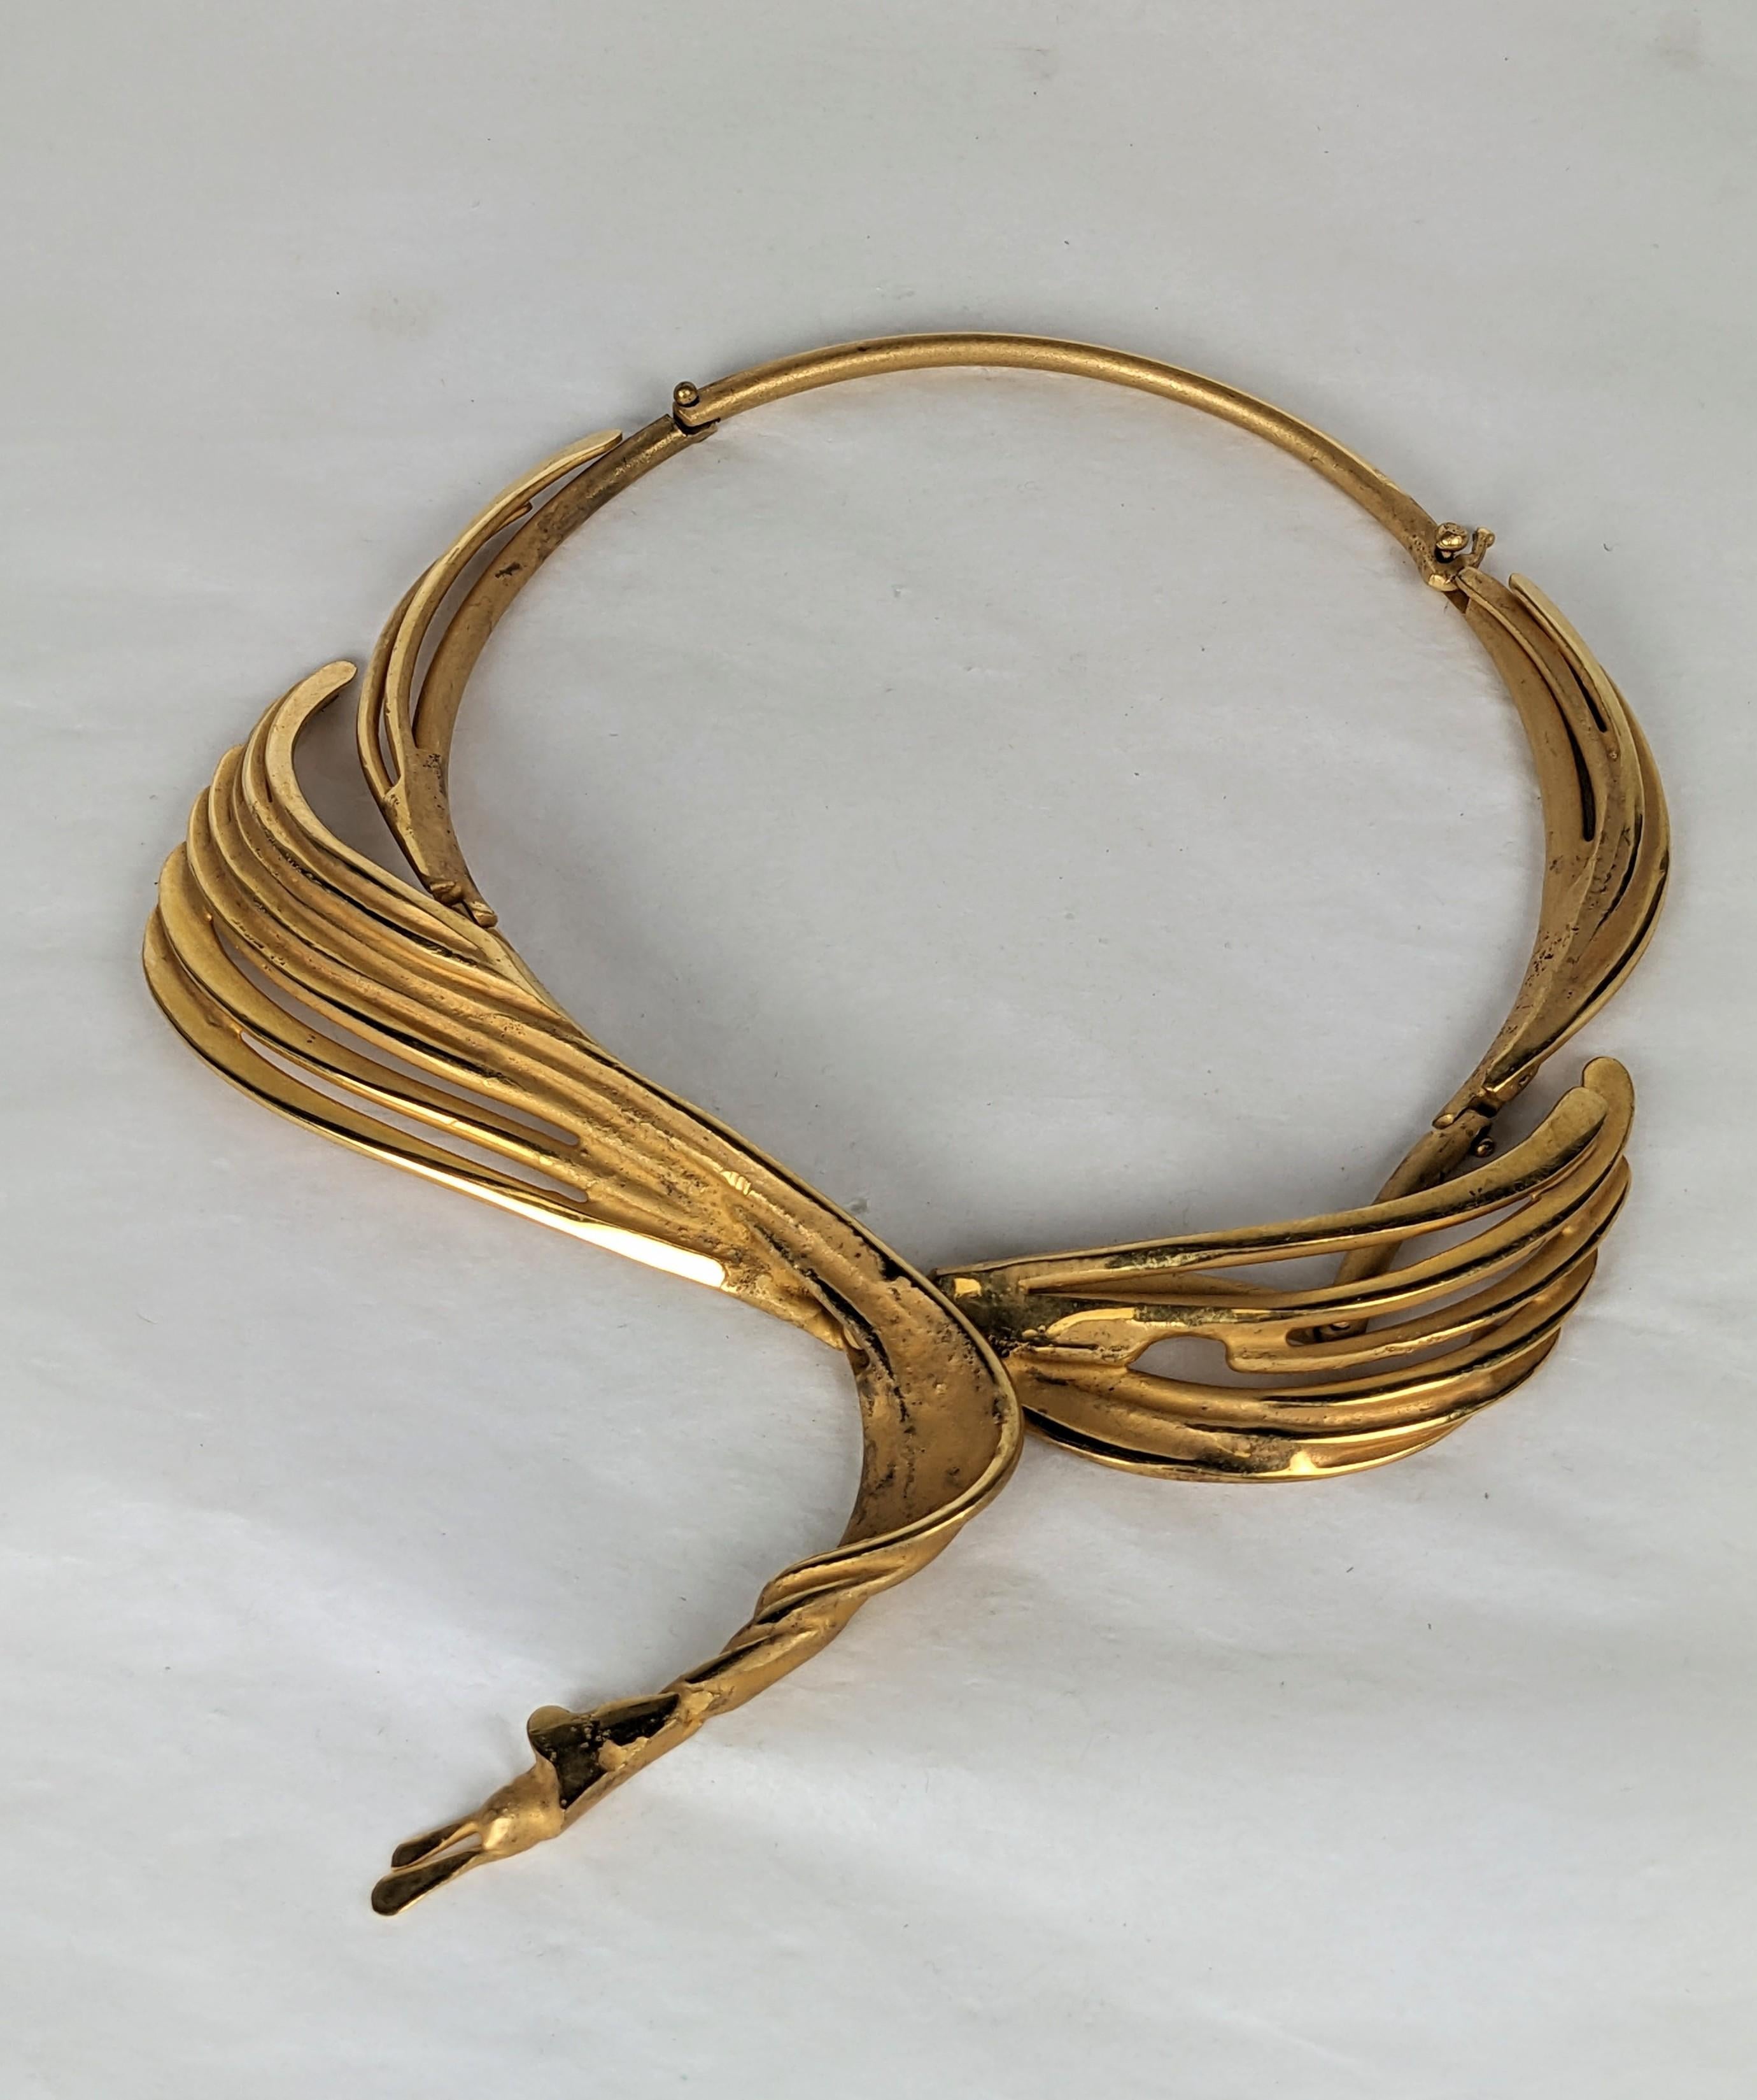 Dramatic French Winged Bronze Artisanal Collar In Excellent Condition For Sale In New York, NY